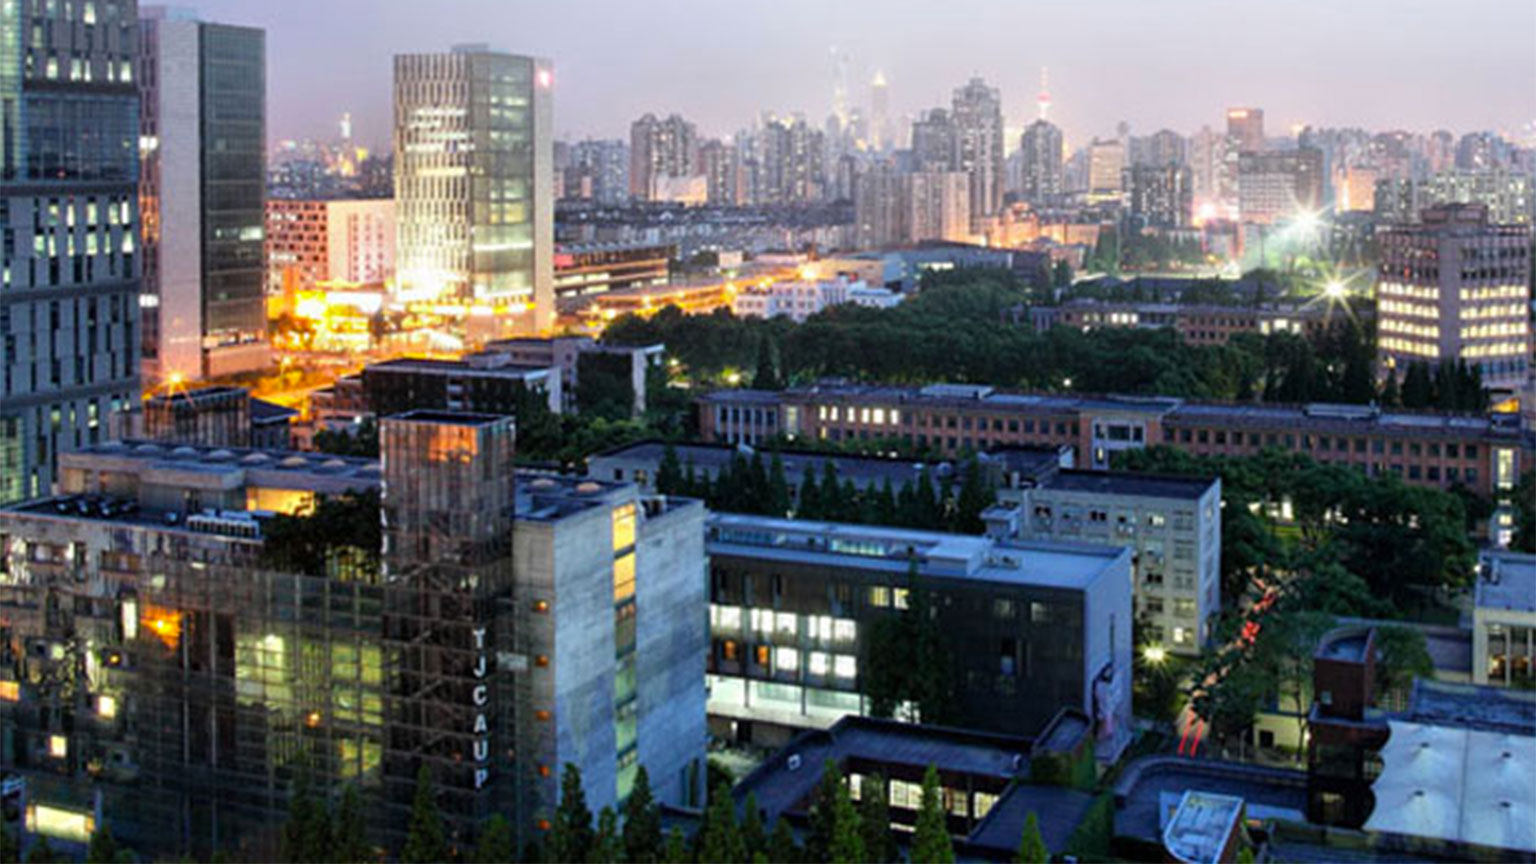 A photo of Tongee University in China, at night.